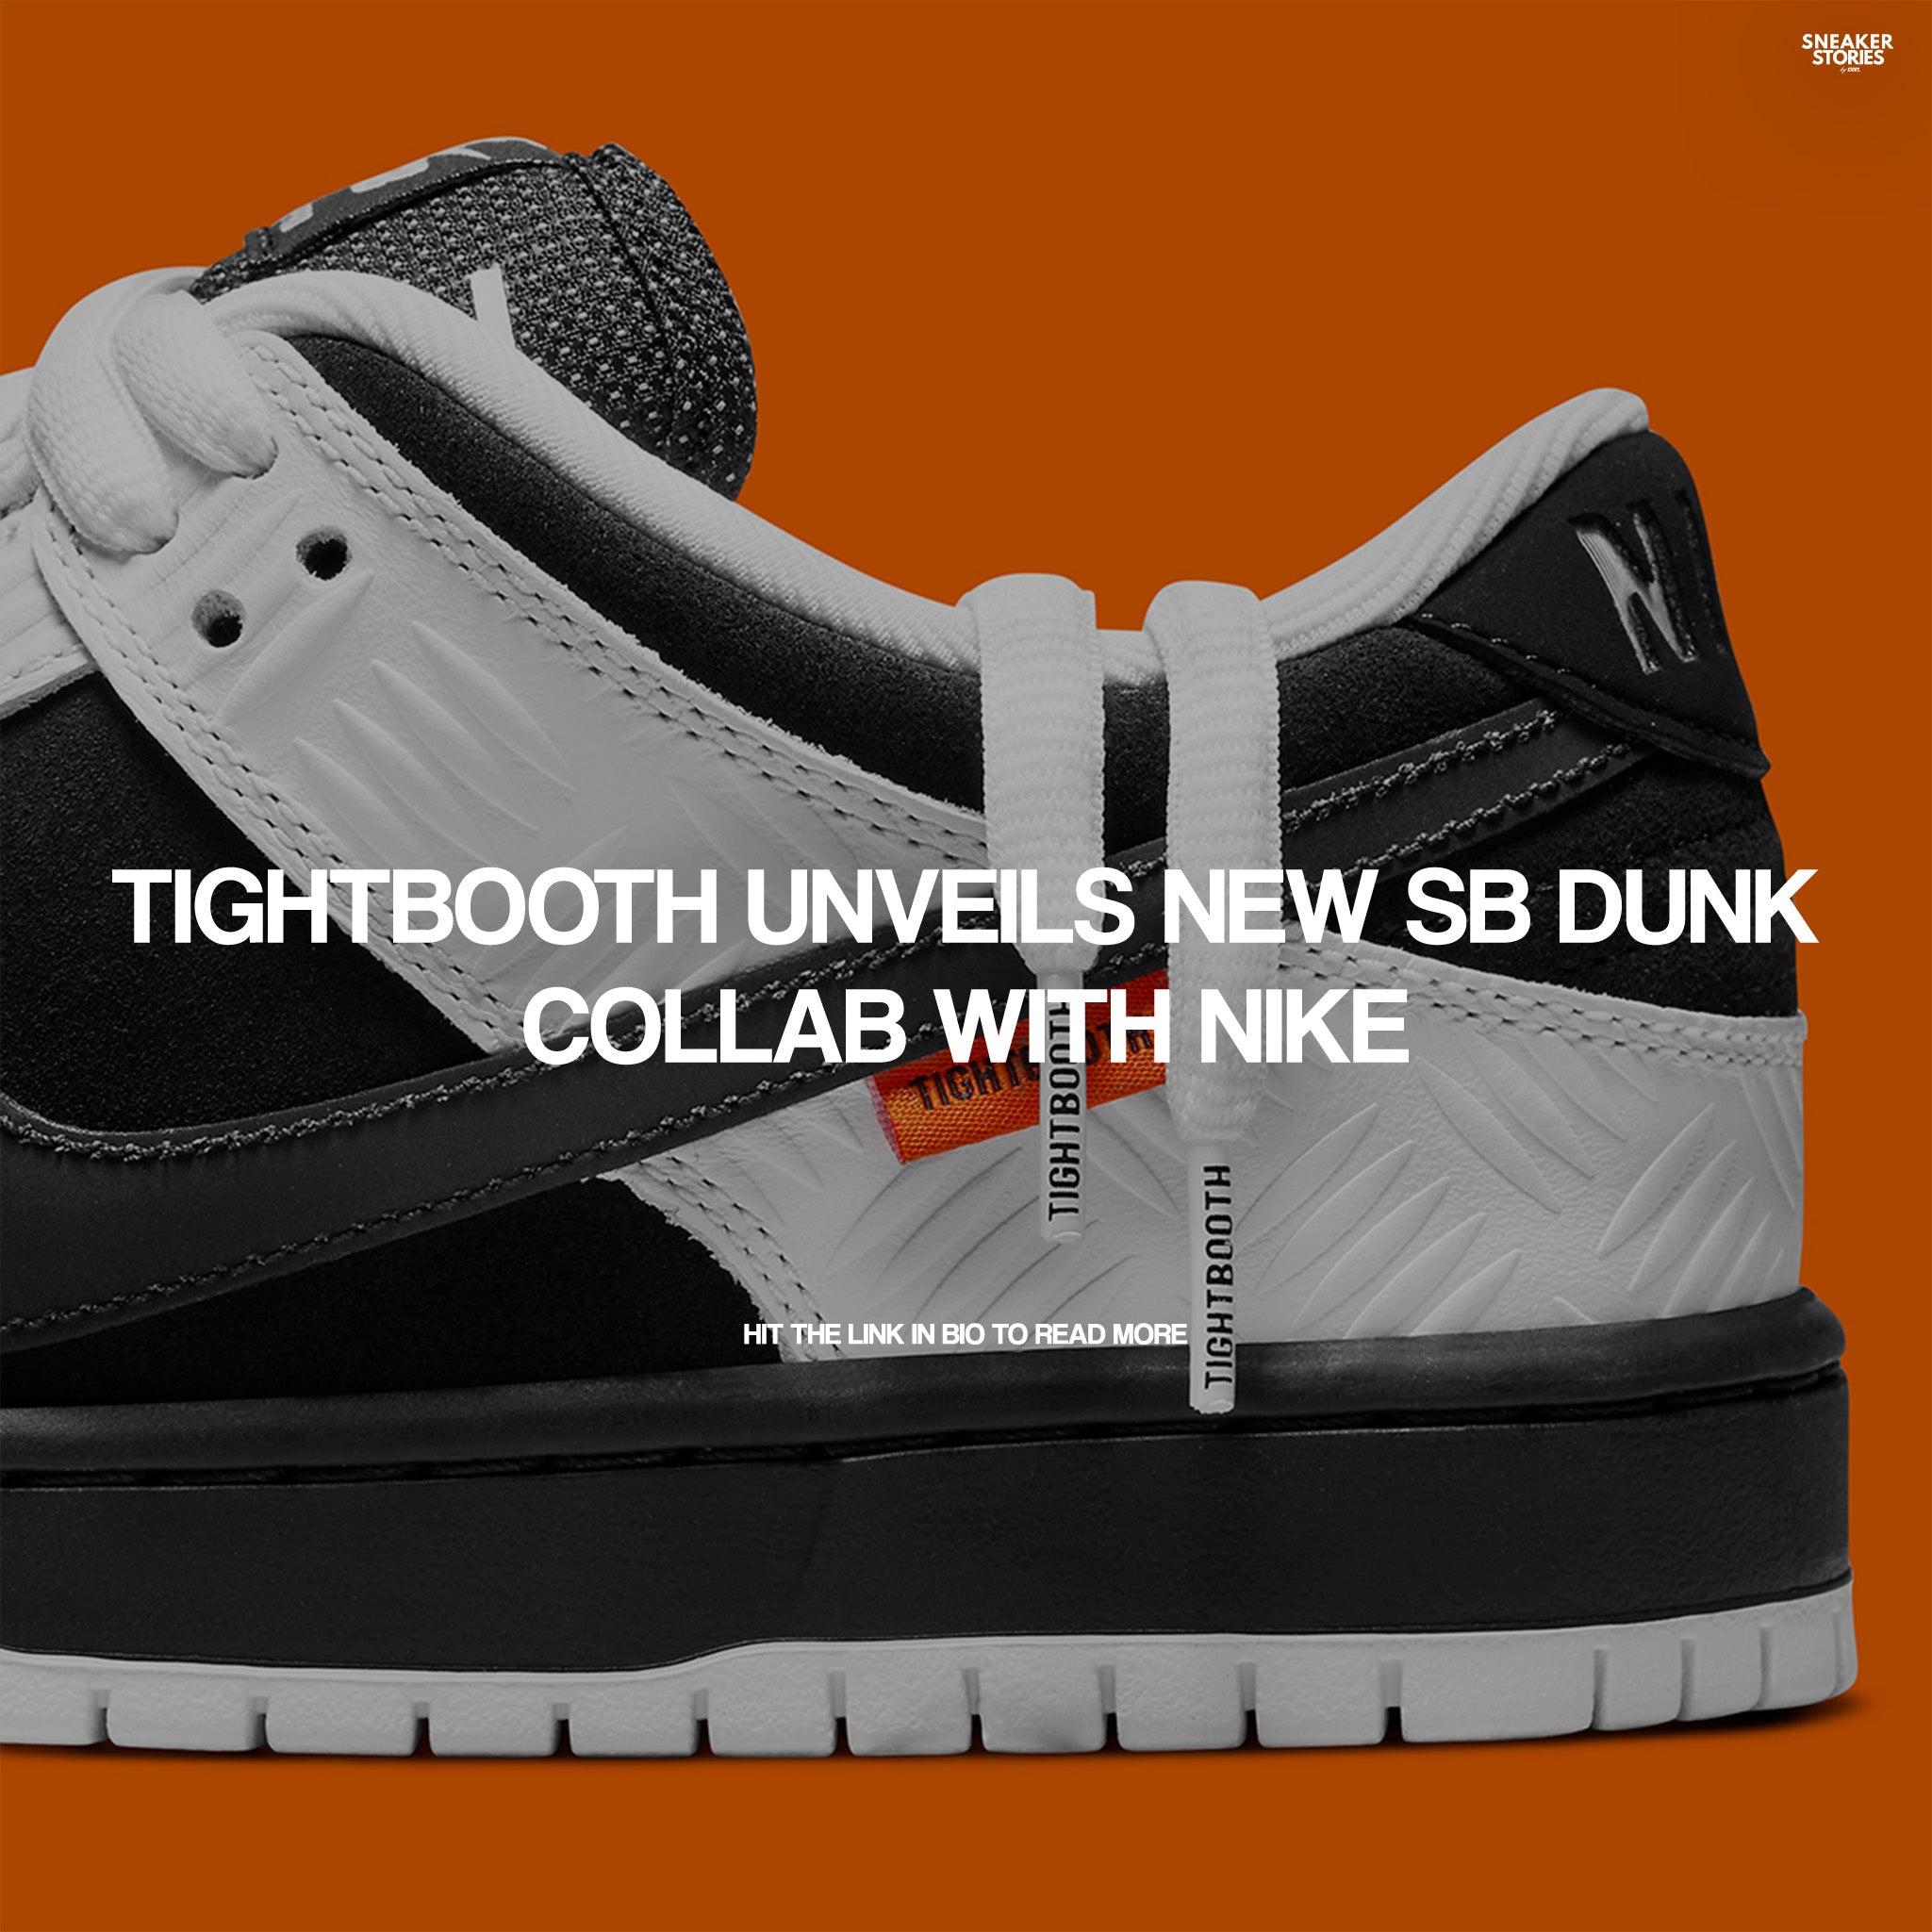 TIGHTBOOTH unveils new SB Dunk collab with Nike